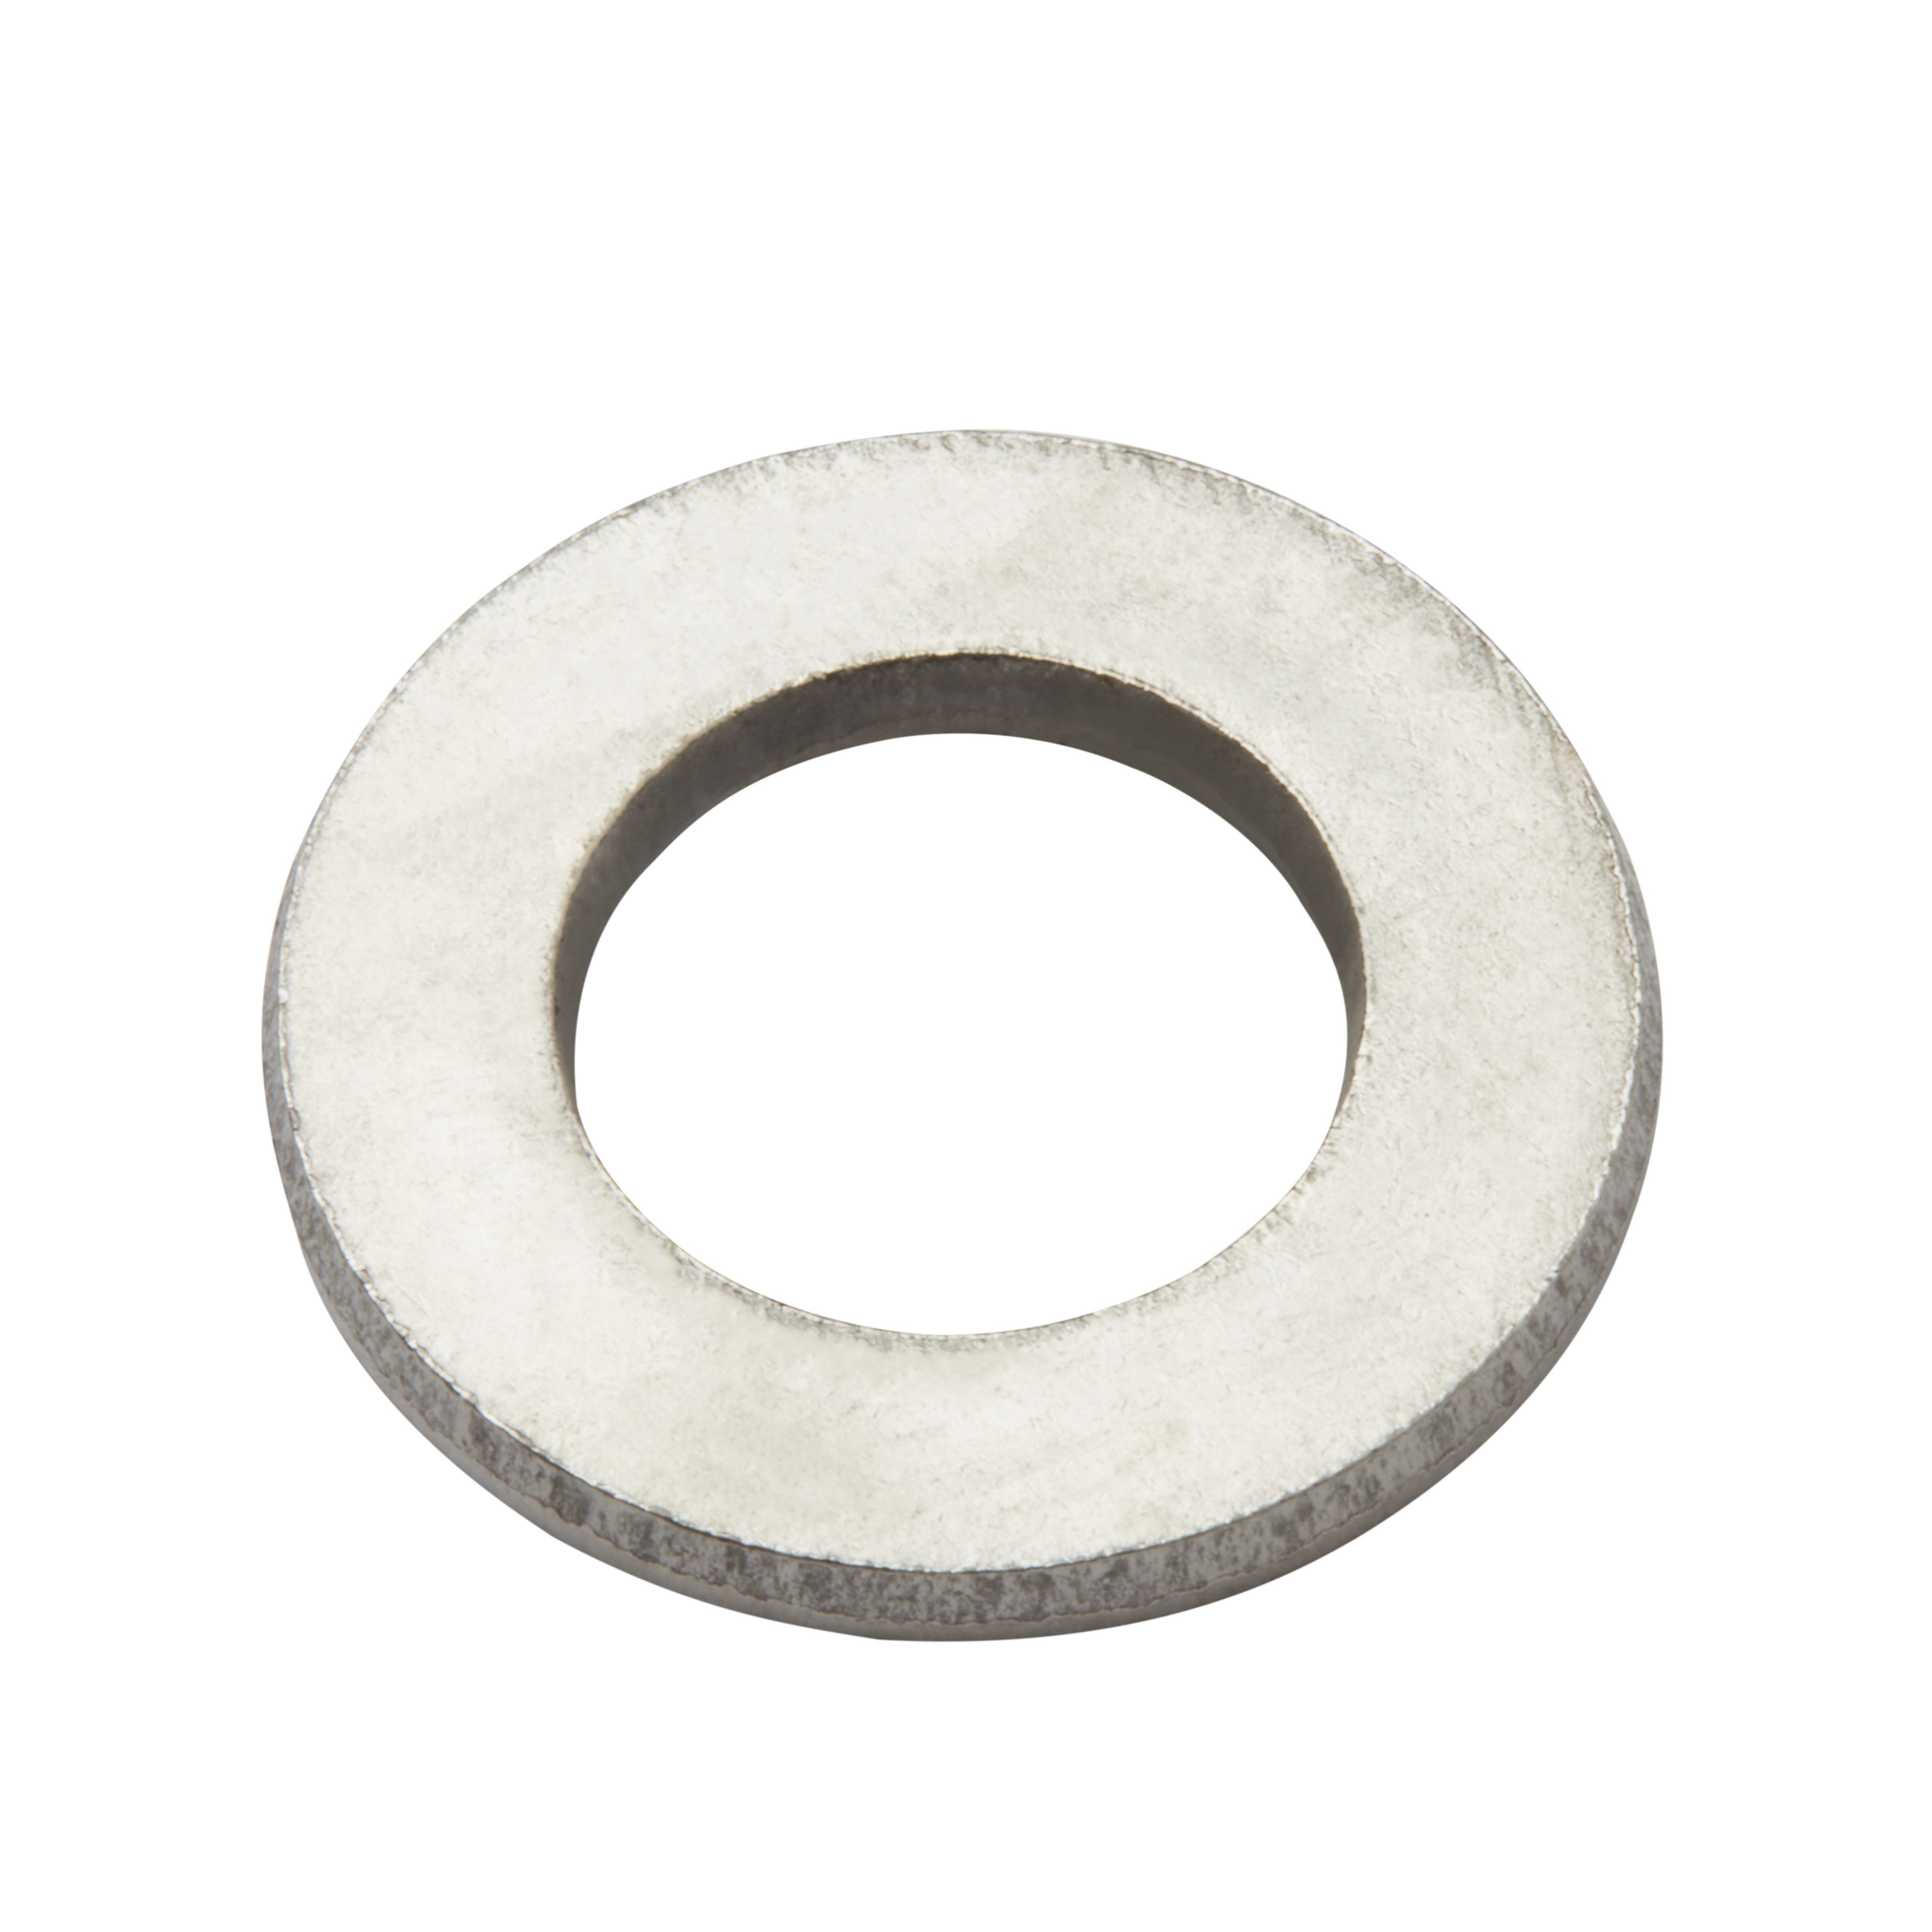 Diall M12 Stainless steel Medium Flat Washer, (Dia)12mm, Pack of 10